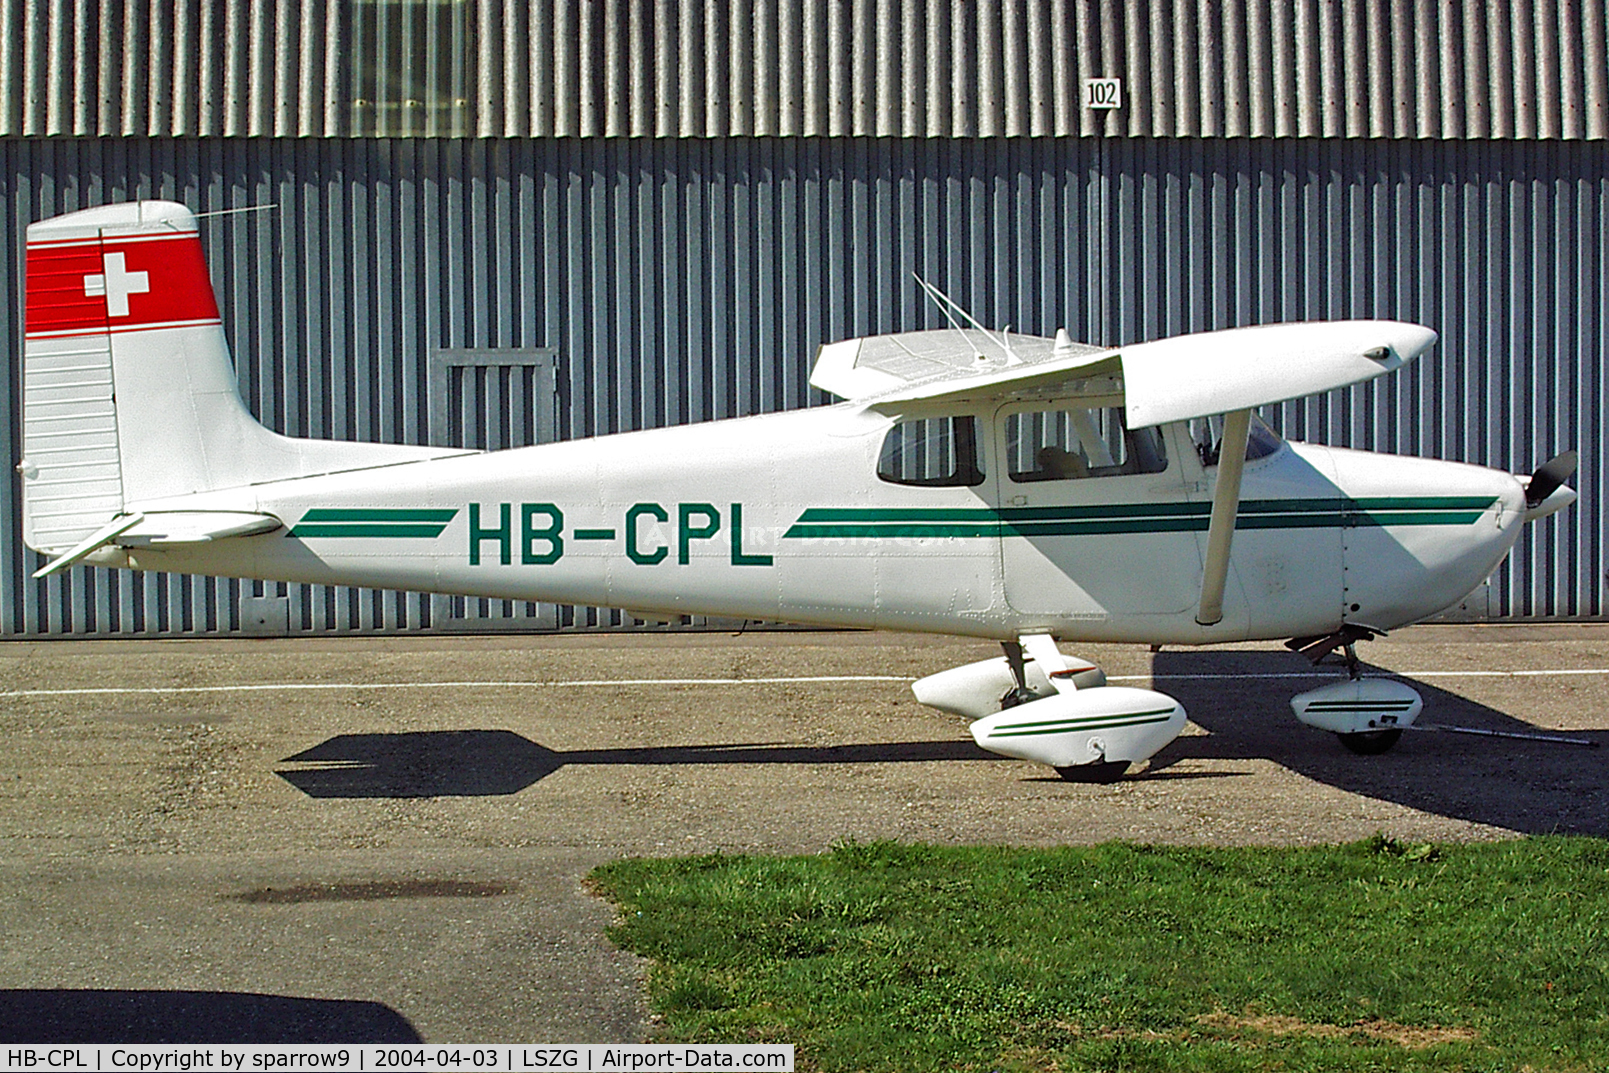 HB-CPL, 1956 Cessna 172 C/N 29046, Hangared at Grenchen at the time. HB-registered from 1956-08-16 until wfu 2013-05-21 after an accident 2013-04-26.